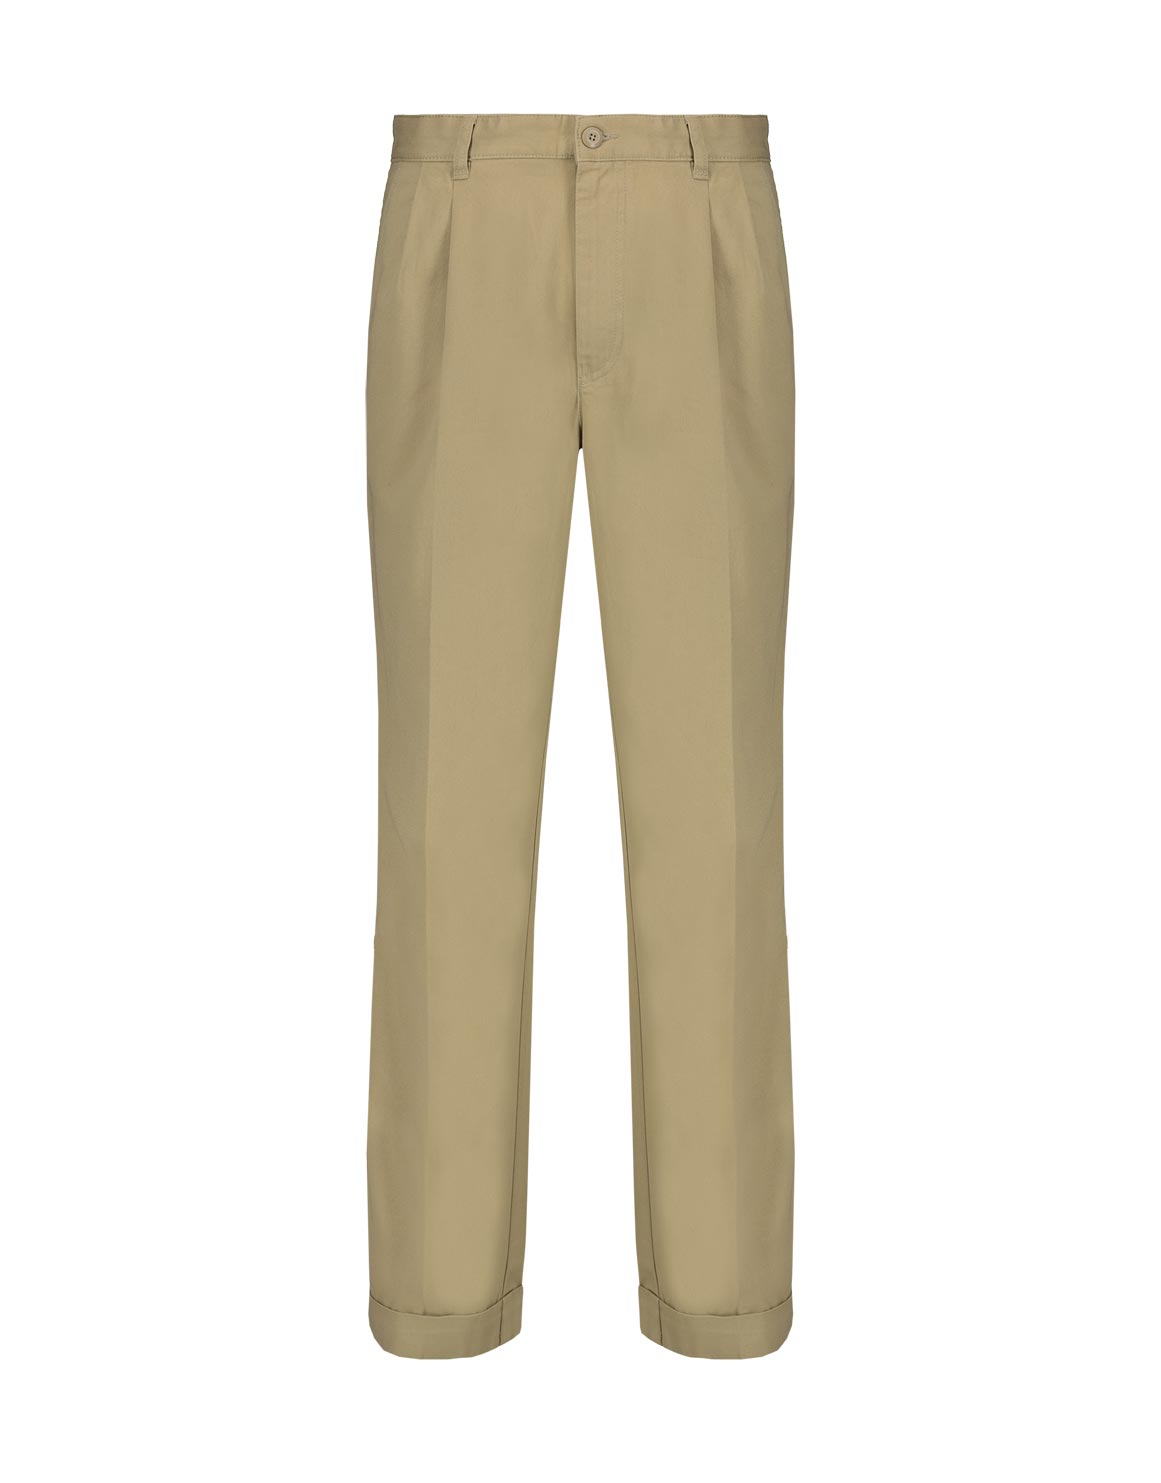 2 Pleat Cotton Chinos | Woolworths.co.za